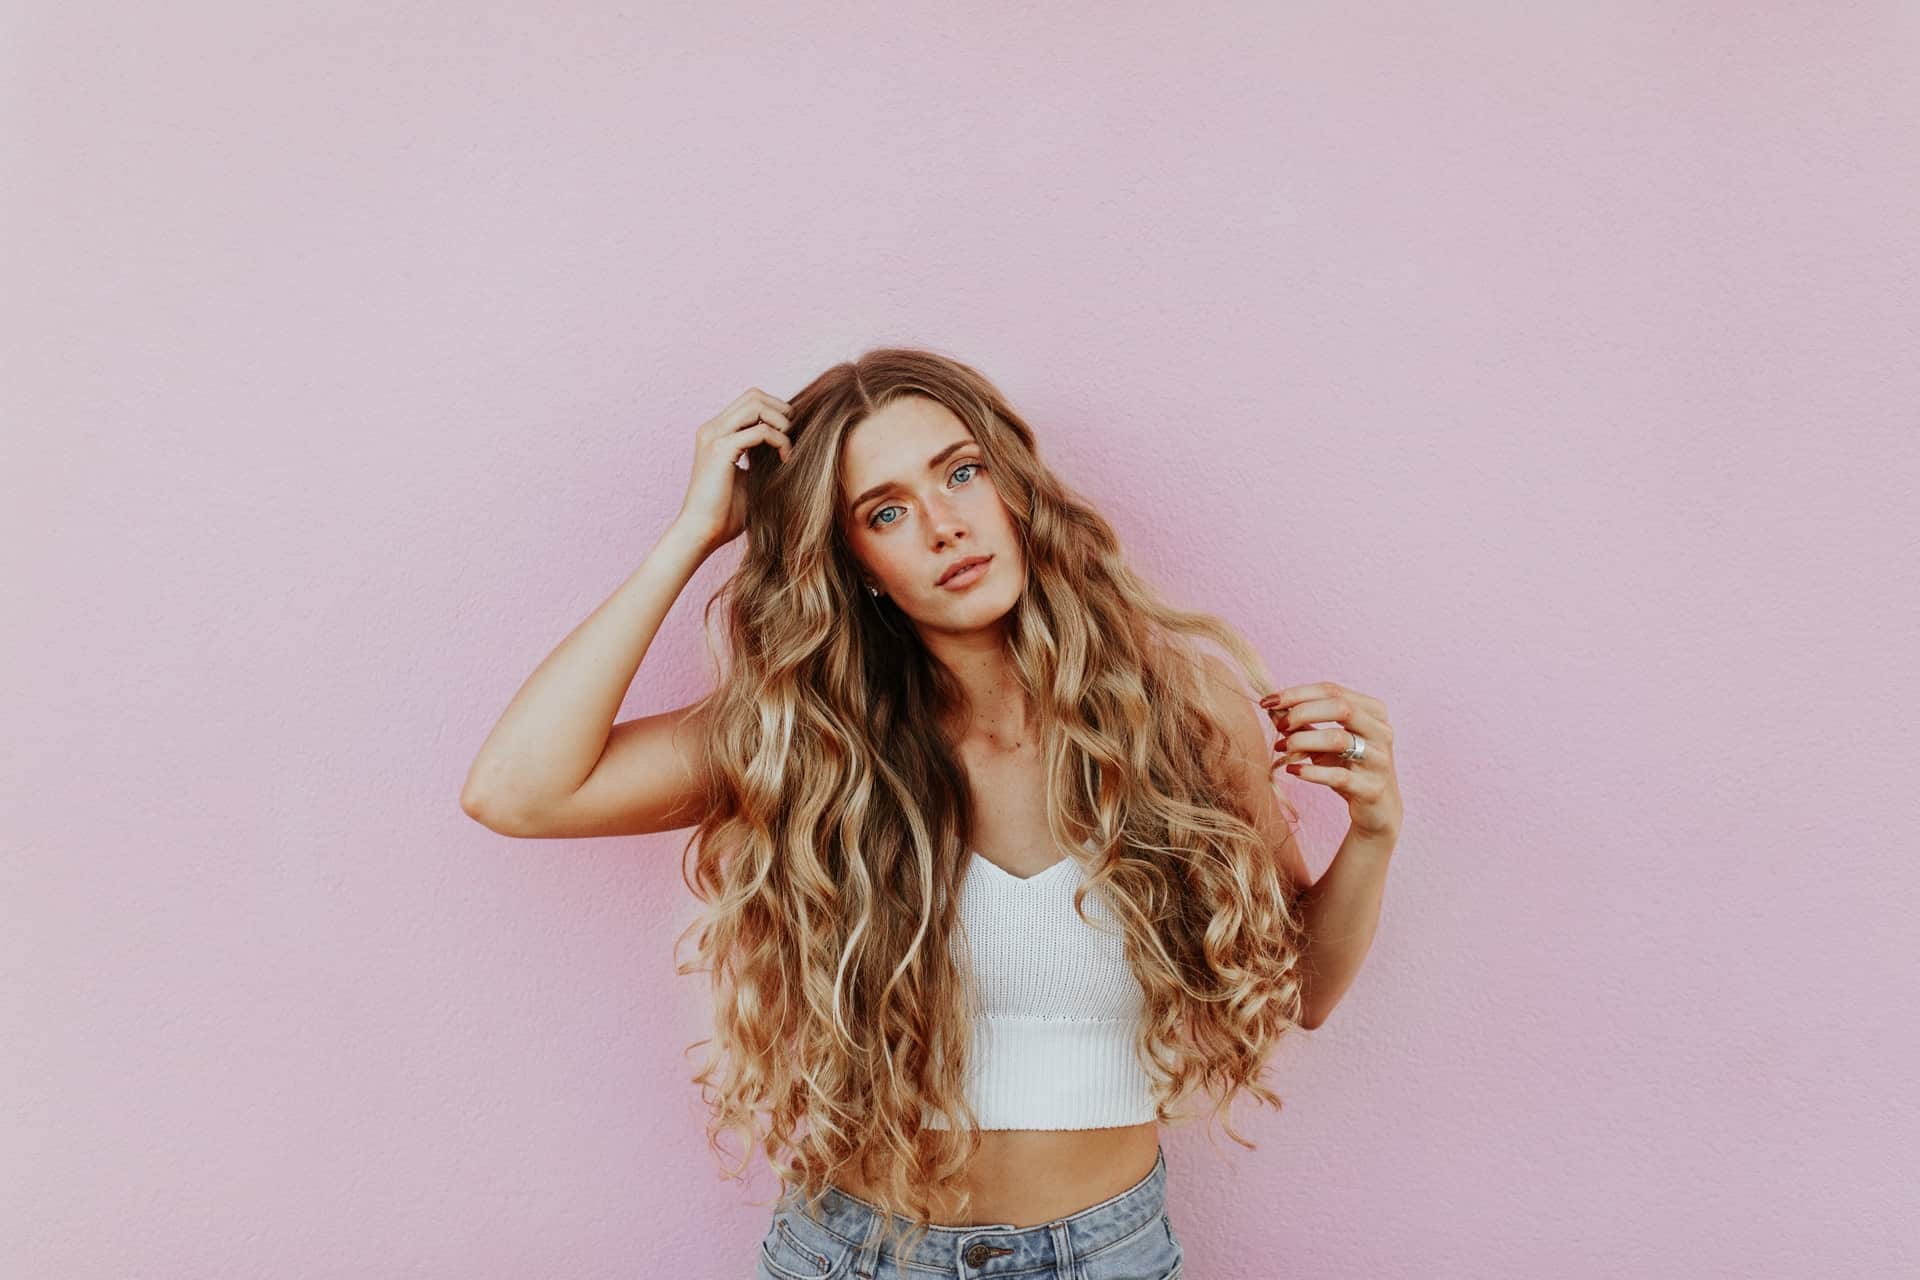 How do you take care of long hair? Check out these mistakes